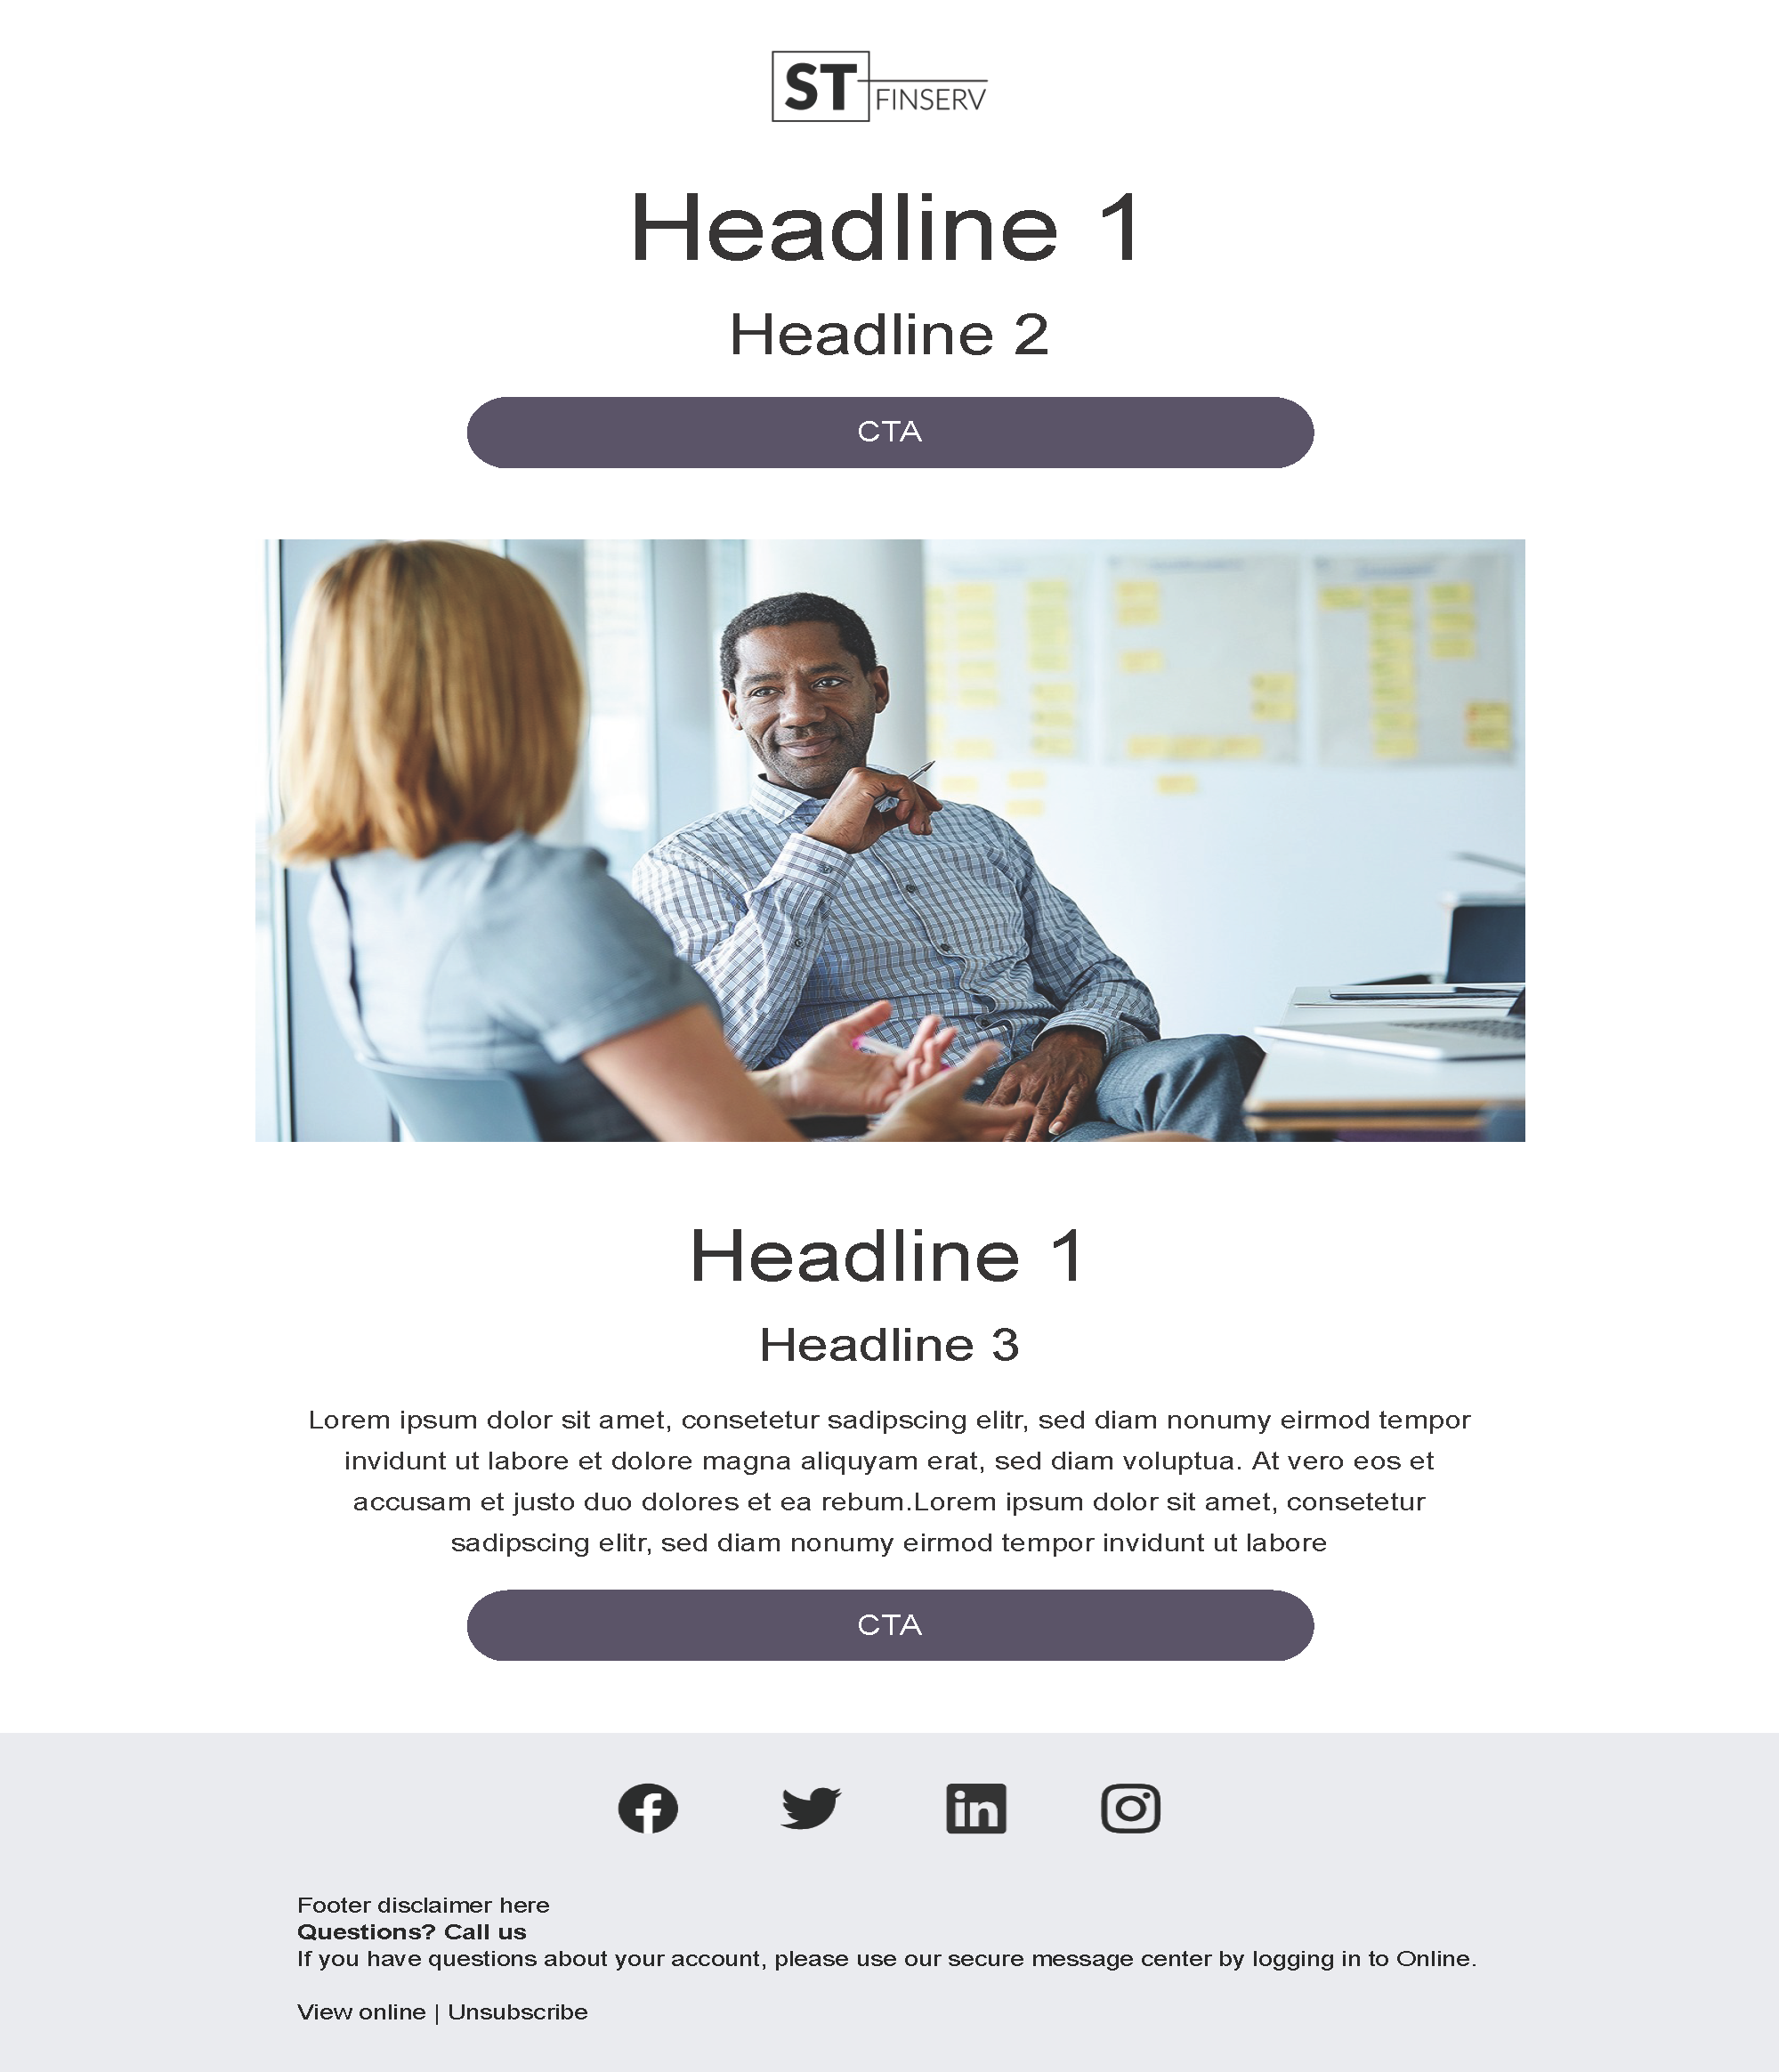 Promotion email template for highly regulated industries